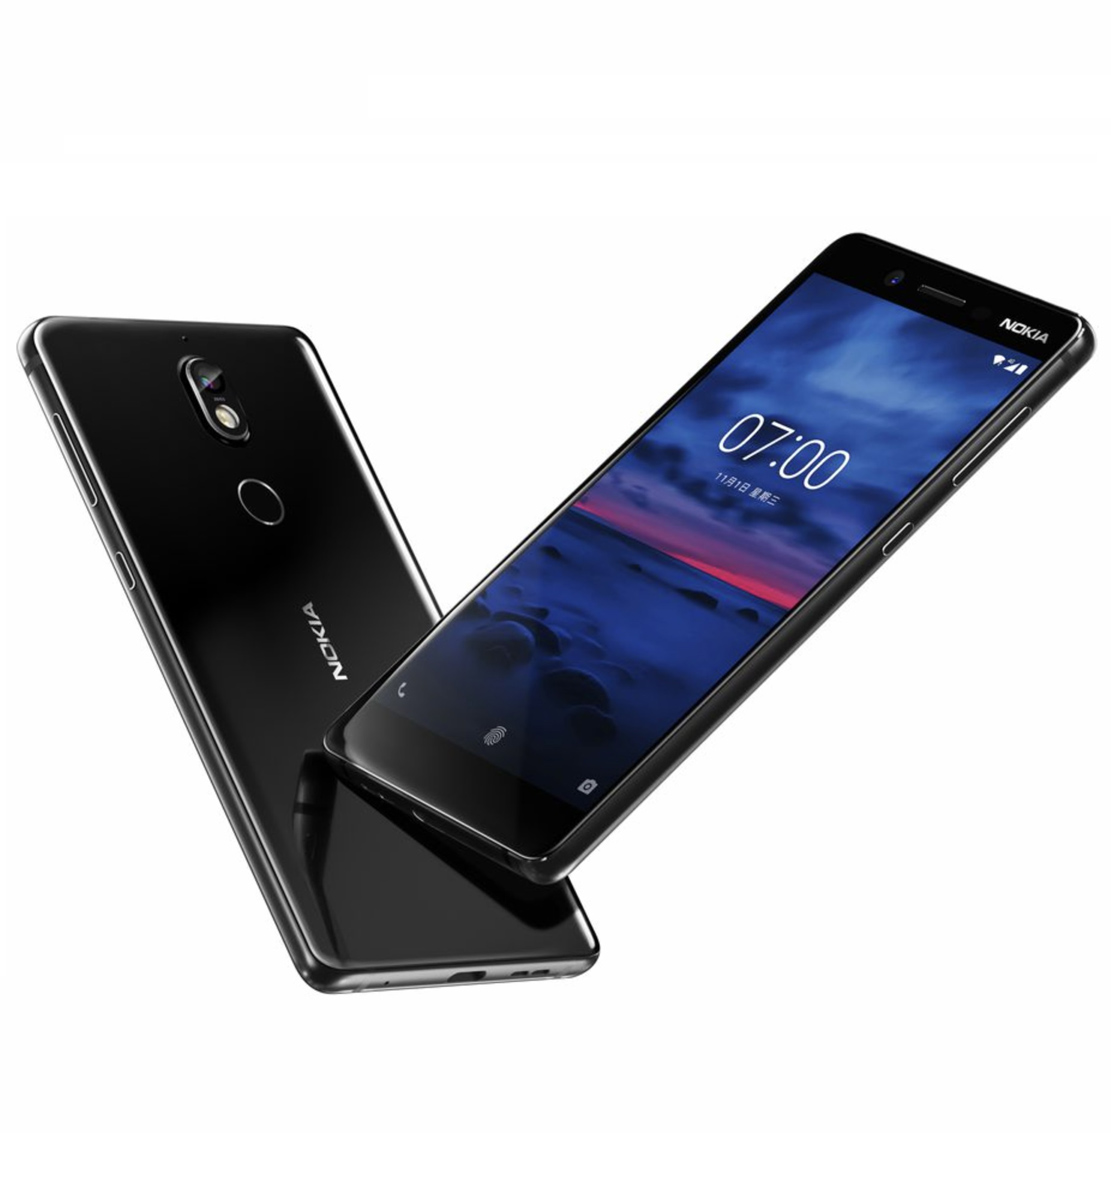 Nokia 7 plus specifications and price in pakistan